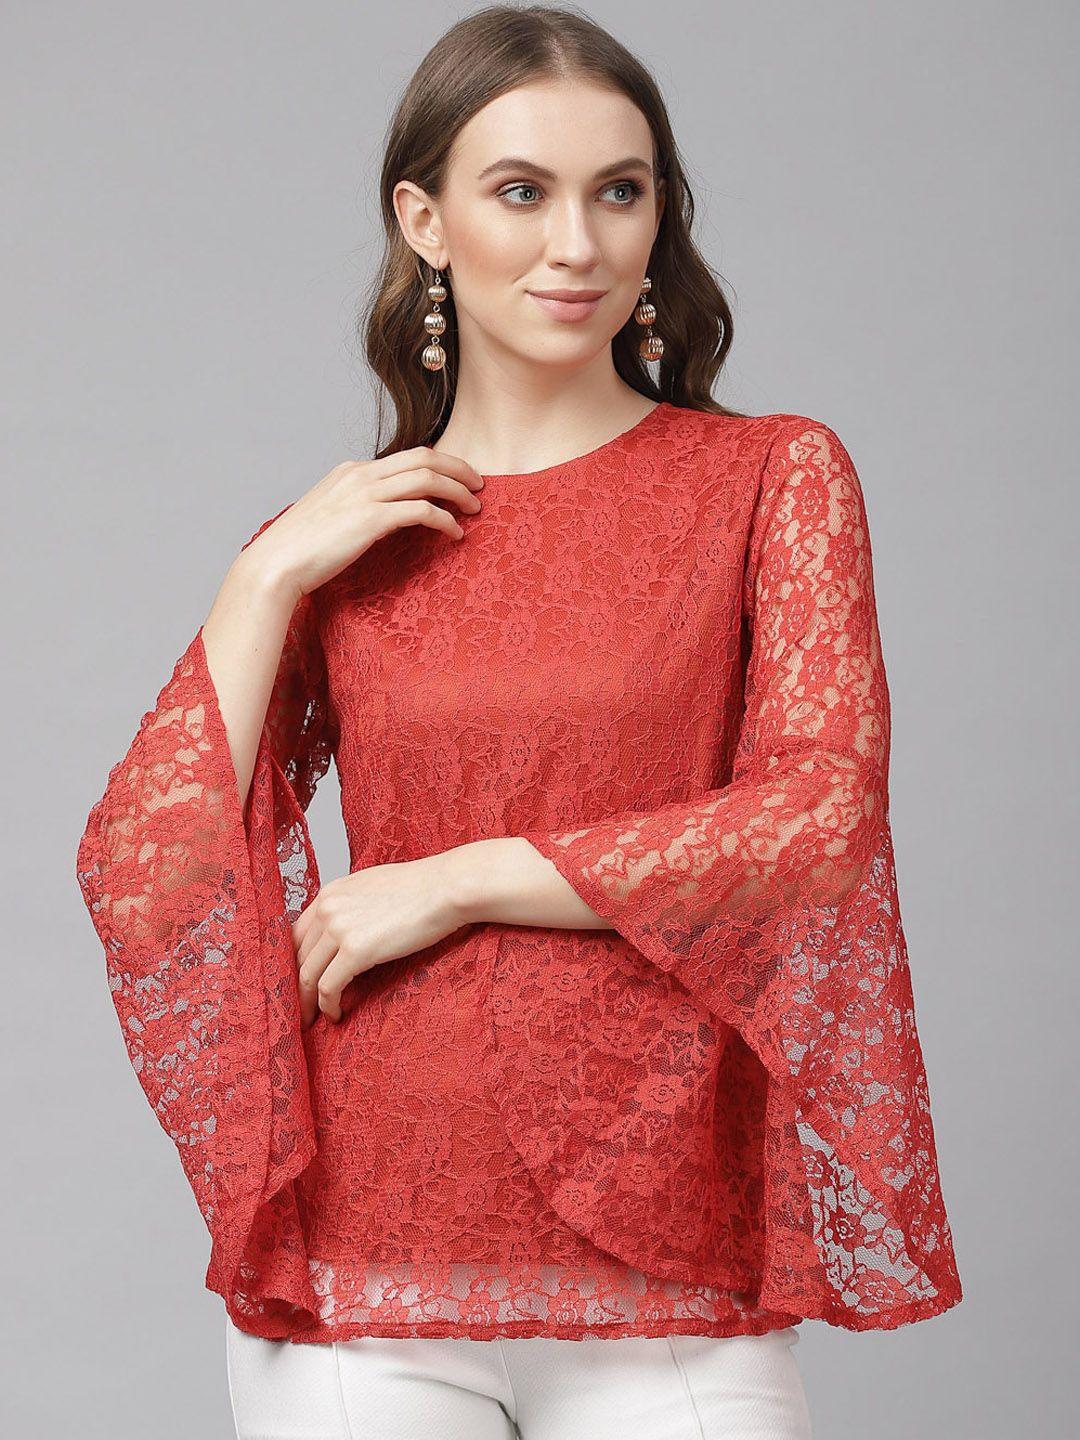 kassually women rust red self design lace top